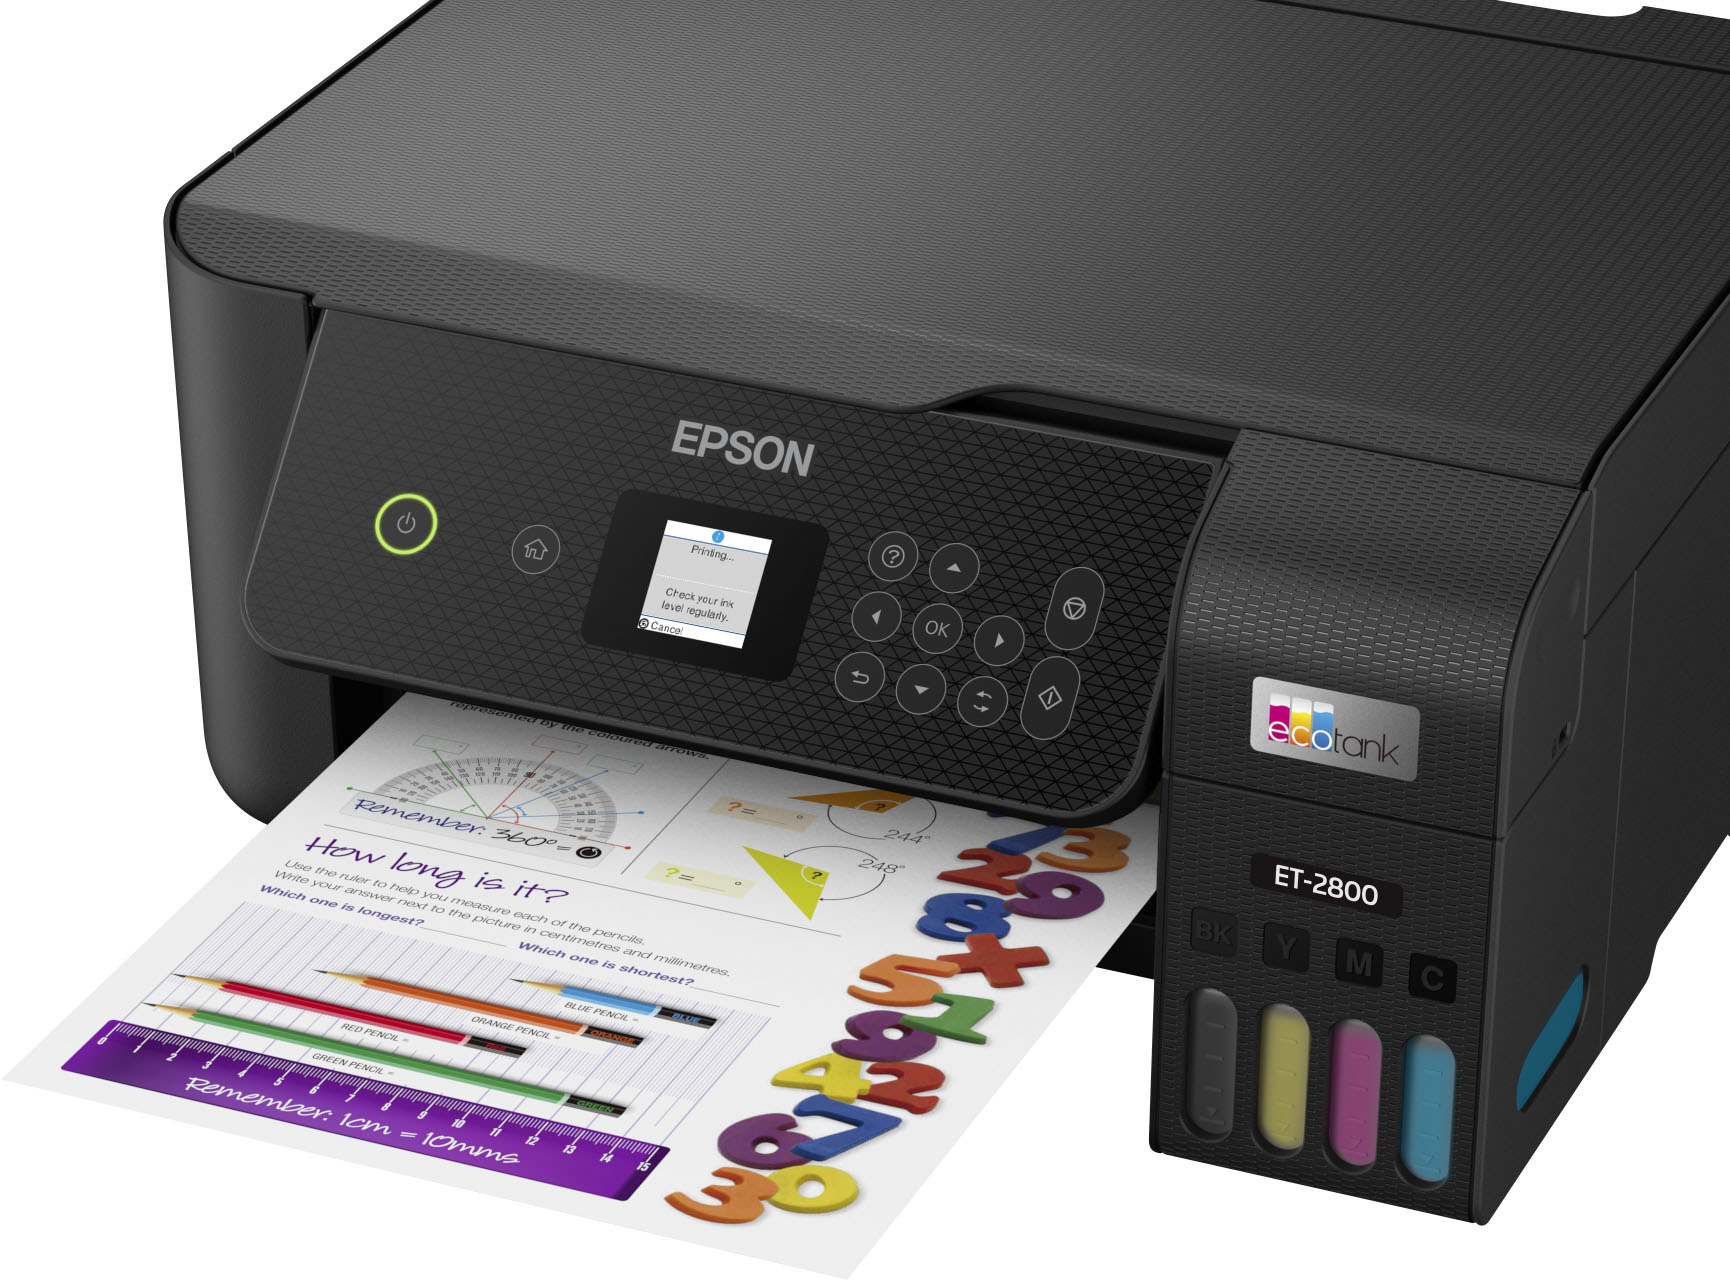  Epson EcoTank ET-2800 Wireless Color All-in-One